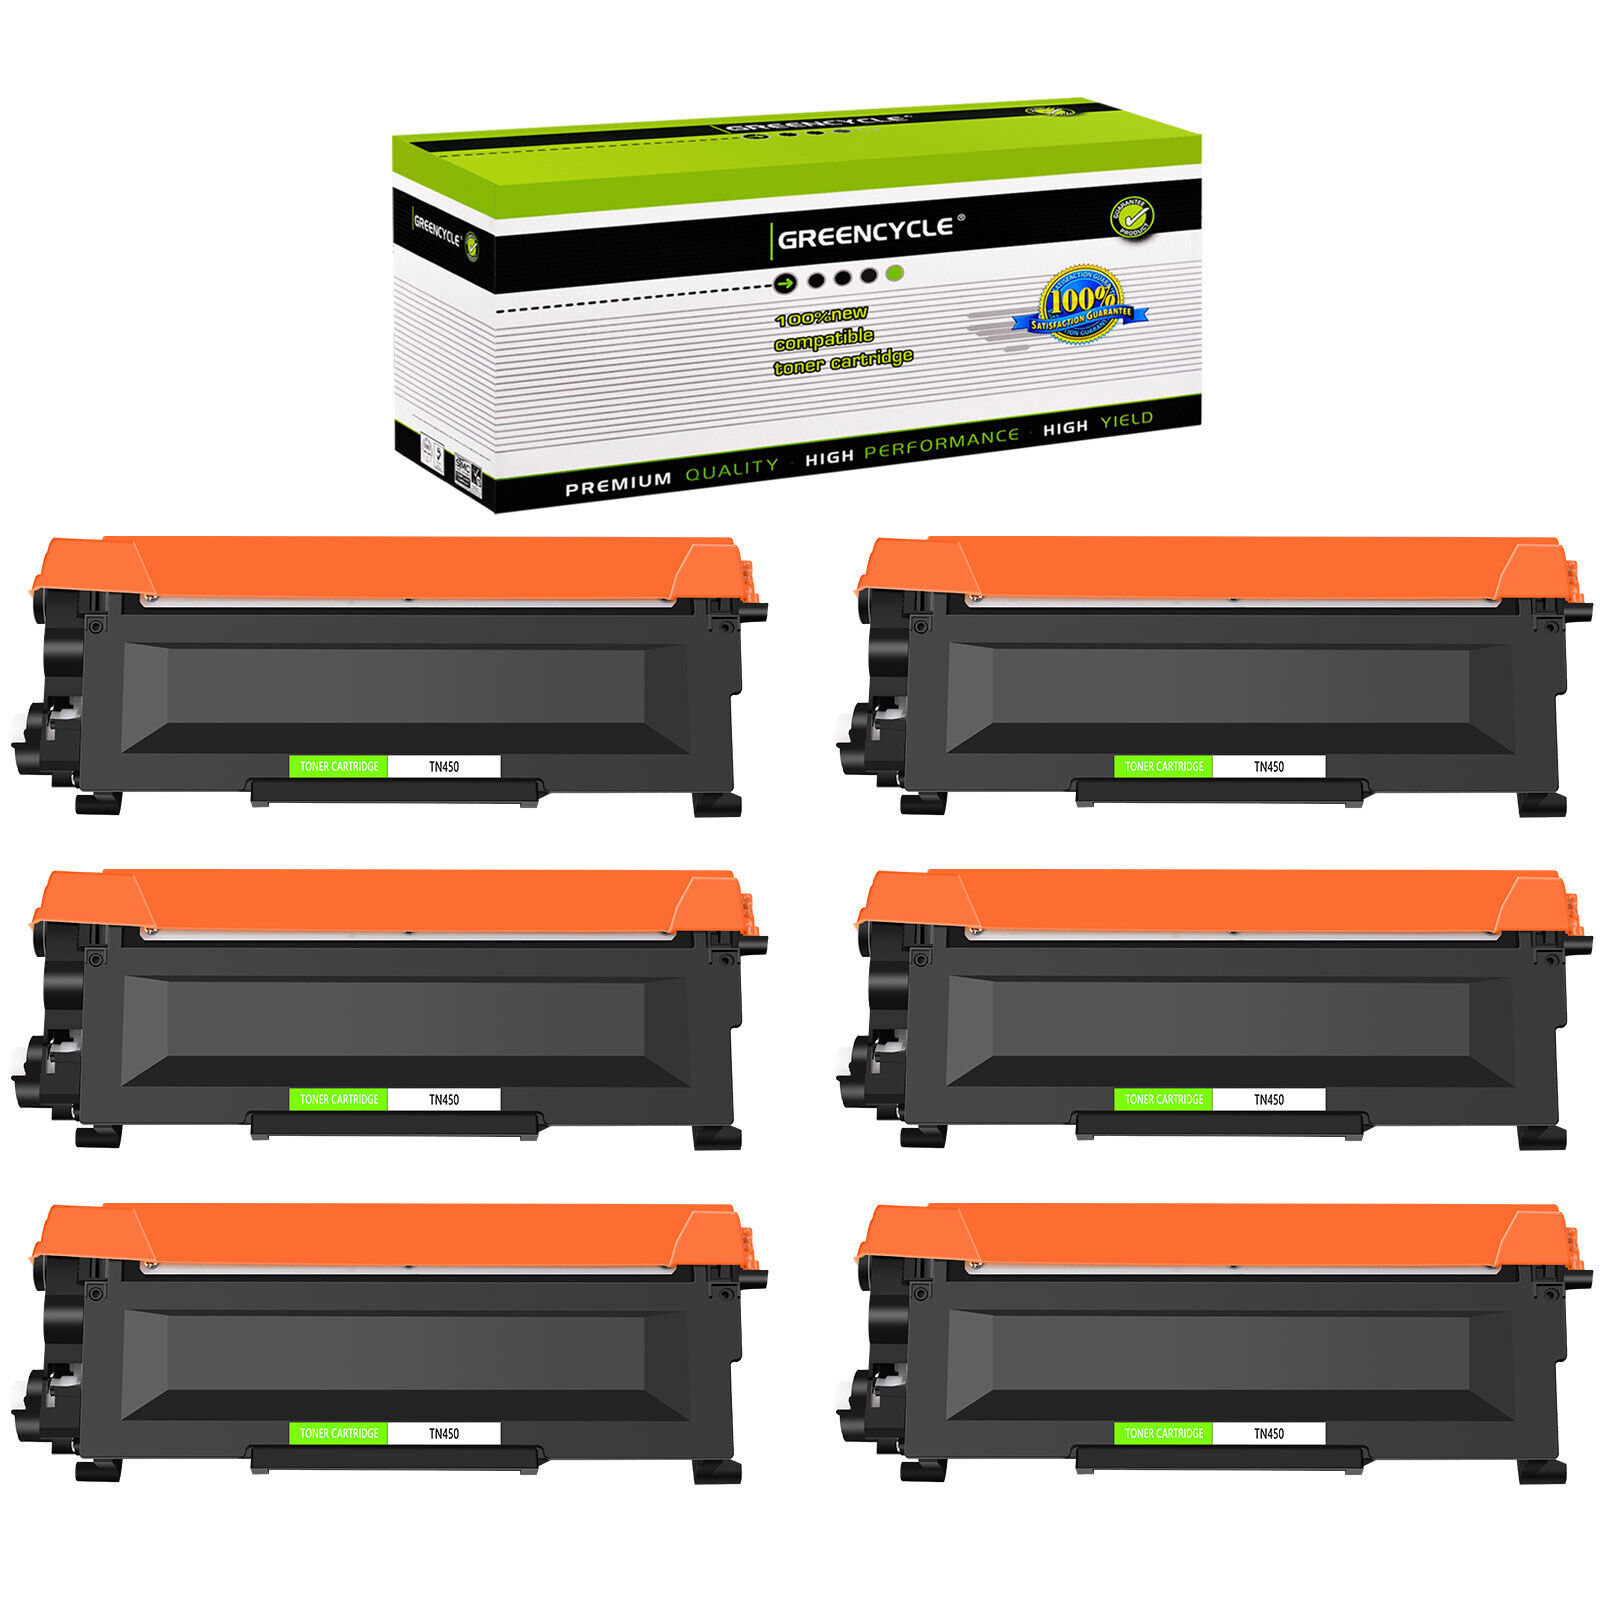 6x TN450 Toner Cartridge Black Compatible for Brother DCP-7060D HL-2240 2280DW